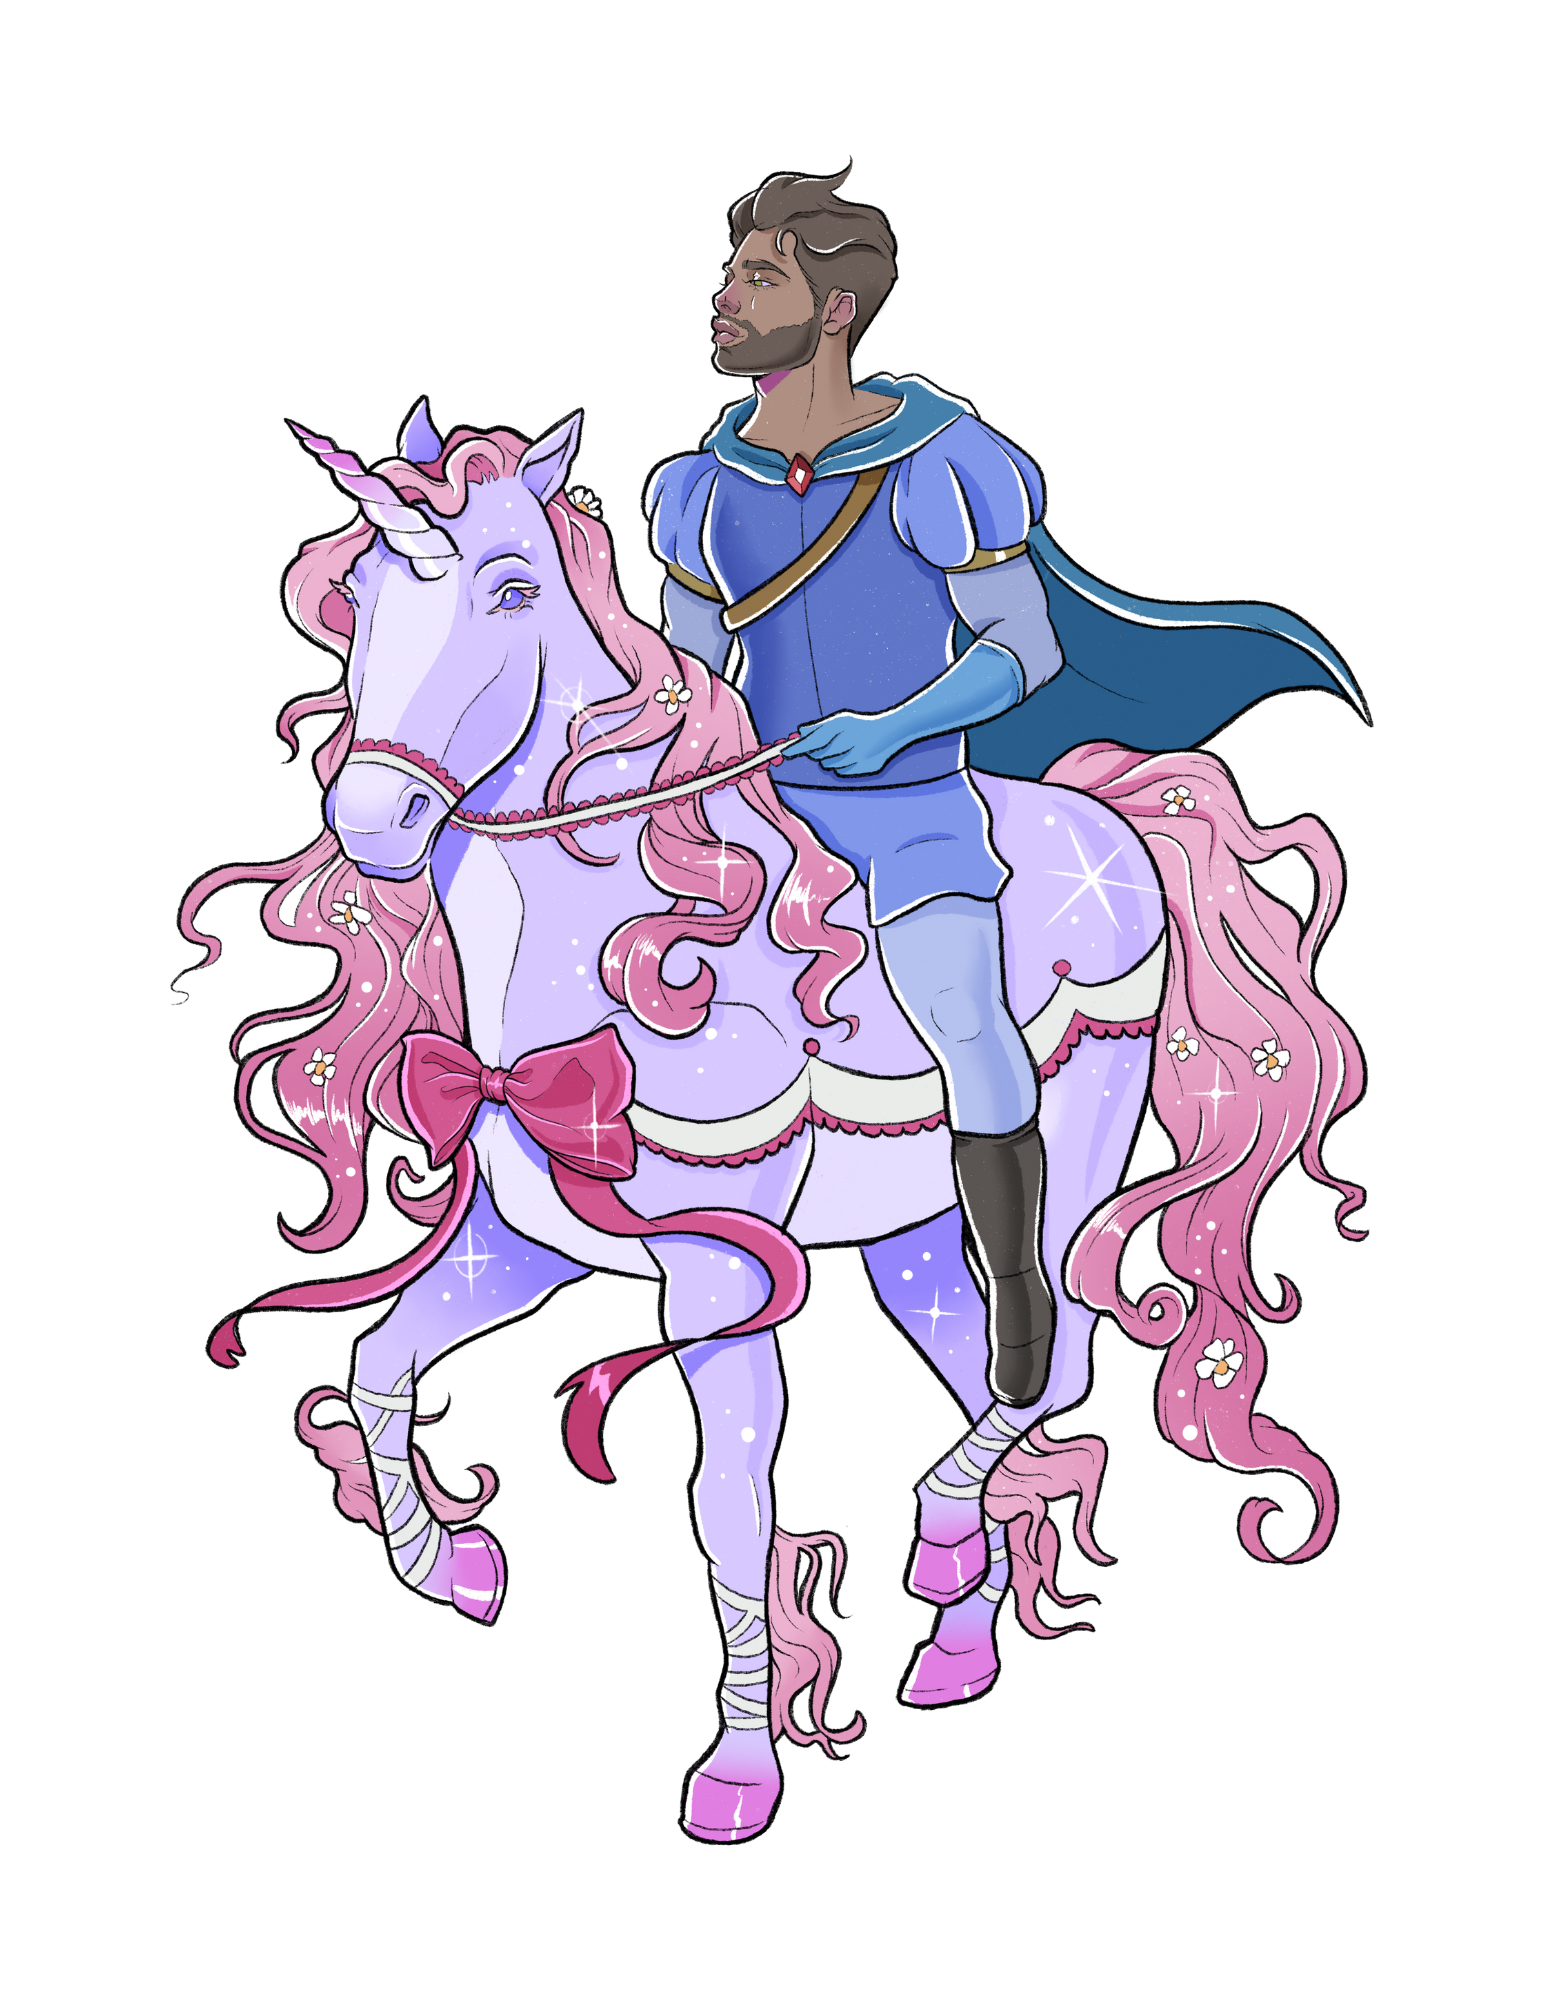 A man dressed in blue medieval style clothing rides a pink unicorn